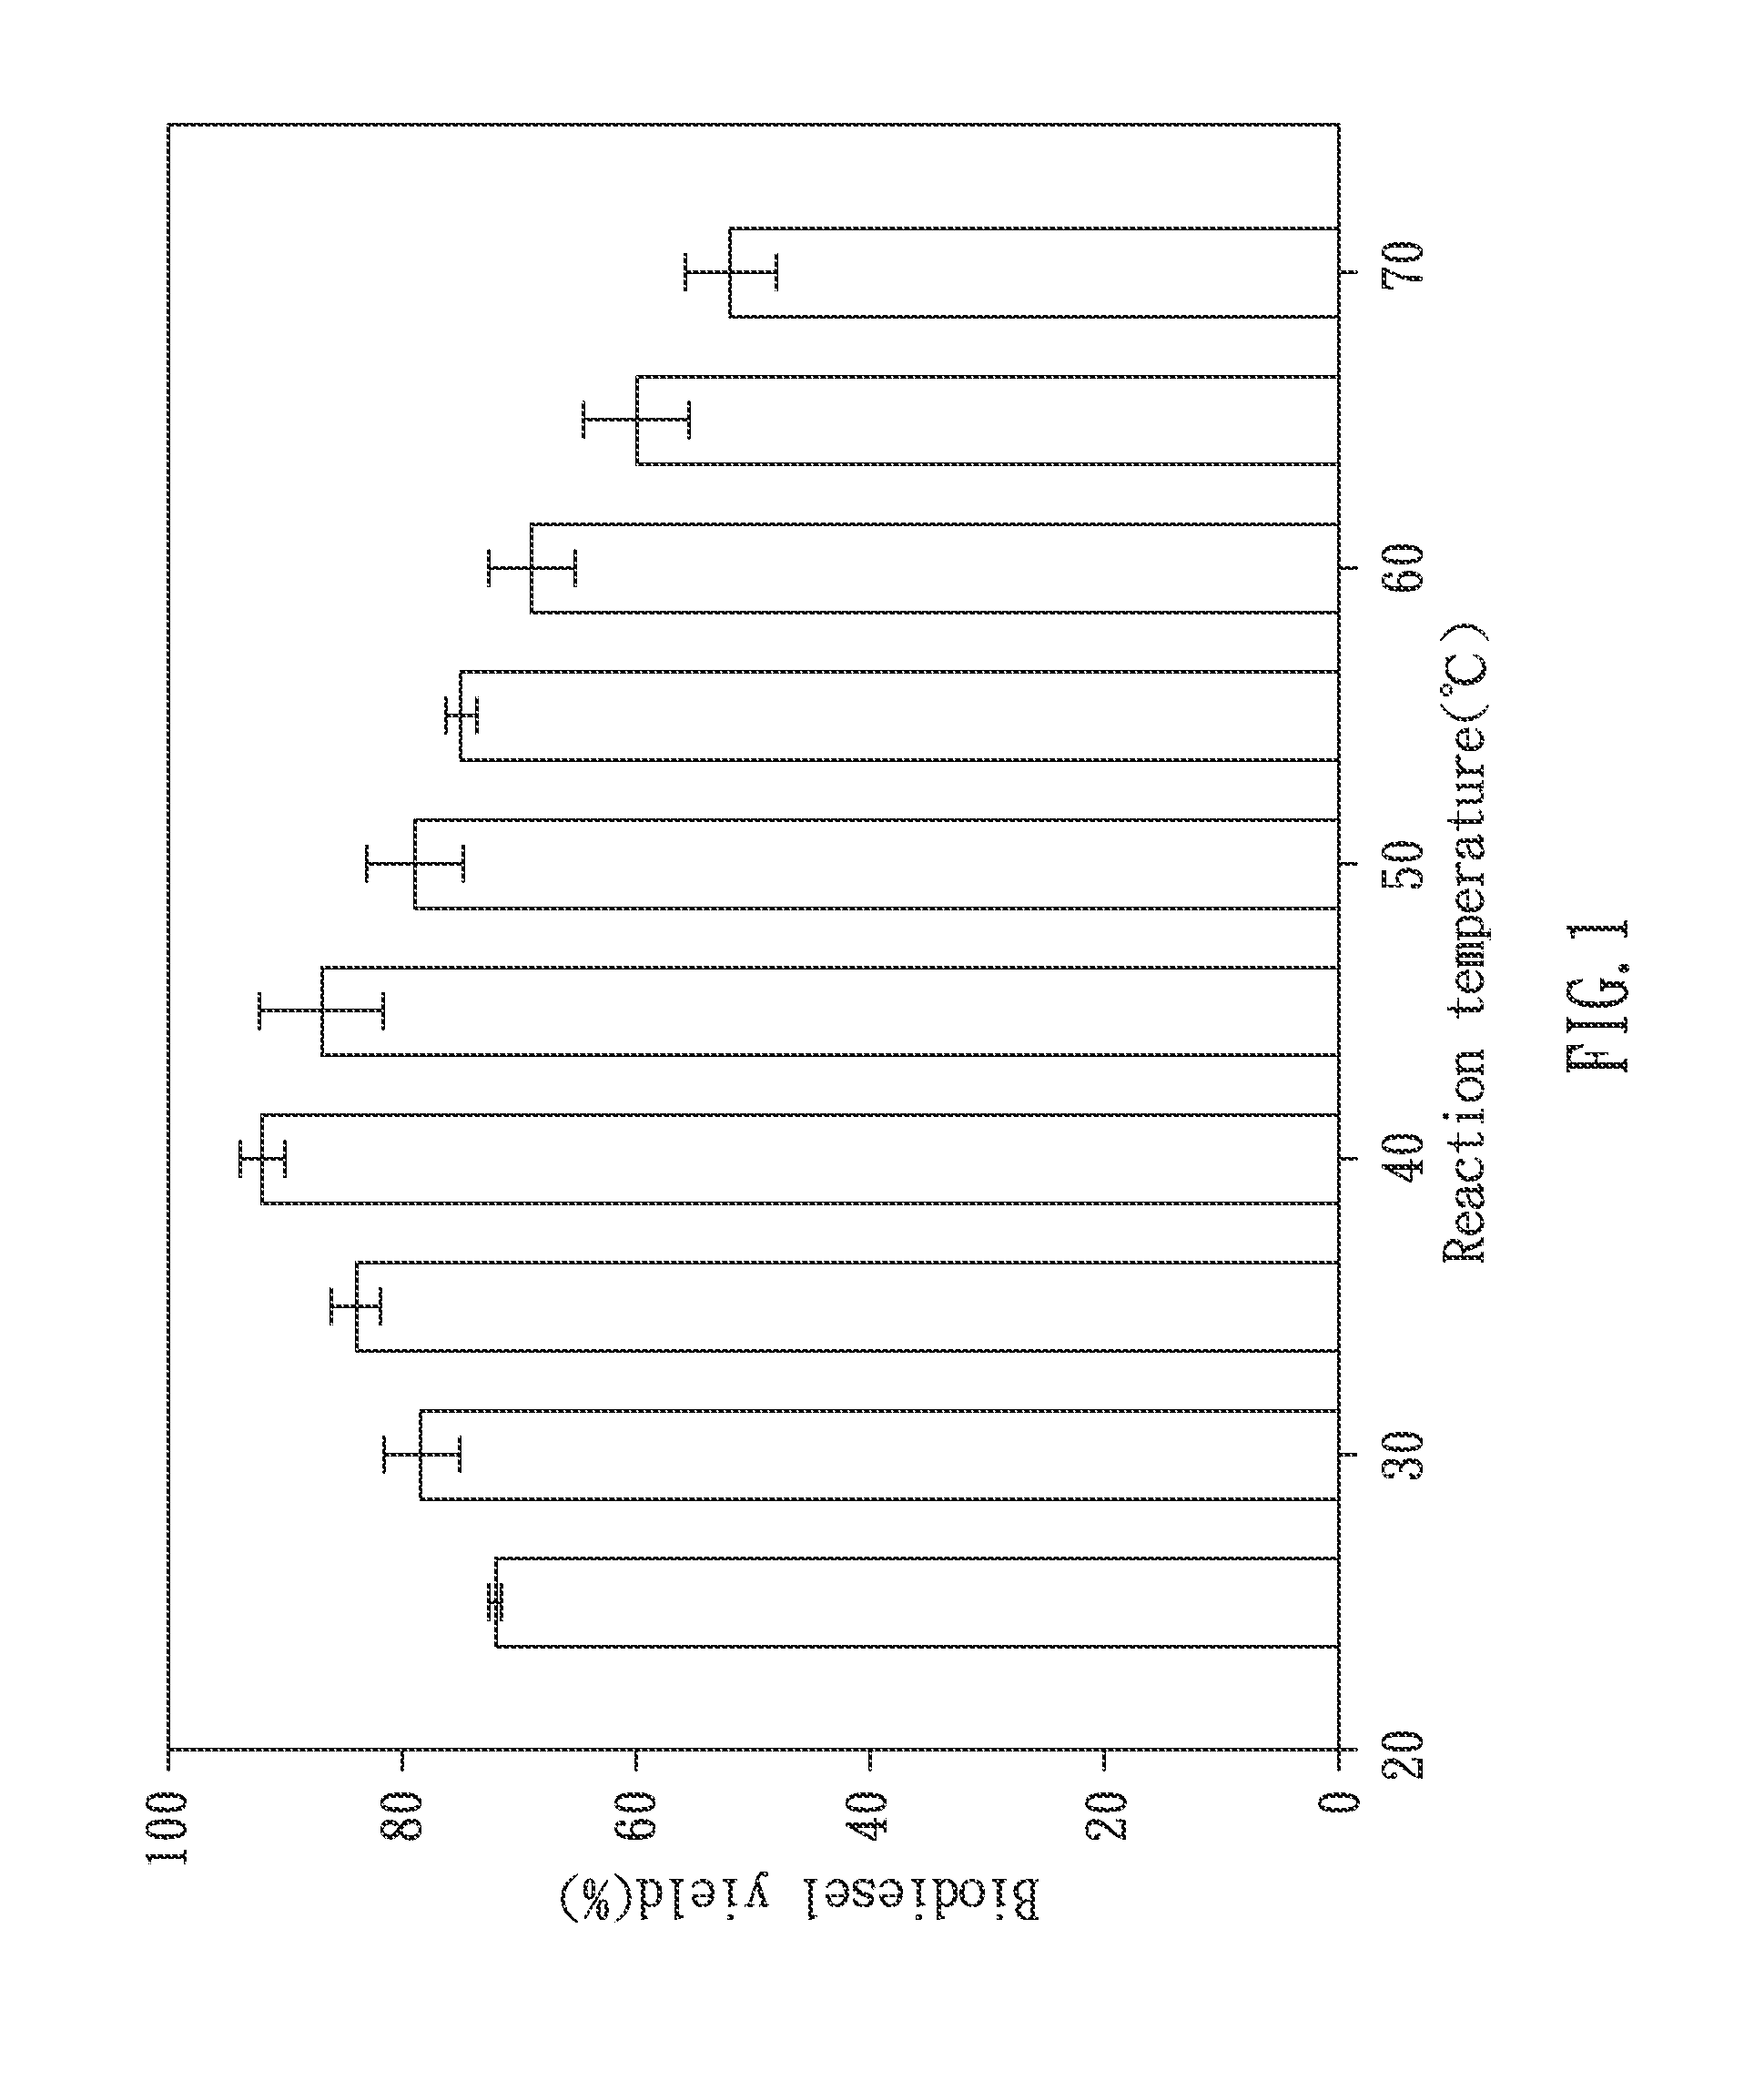 Core-shell magnetic composite and application on producing biodiesel using the same